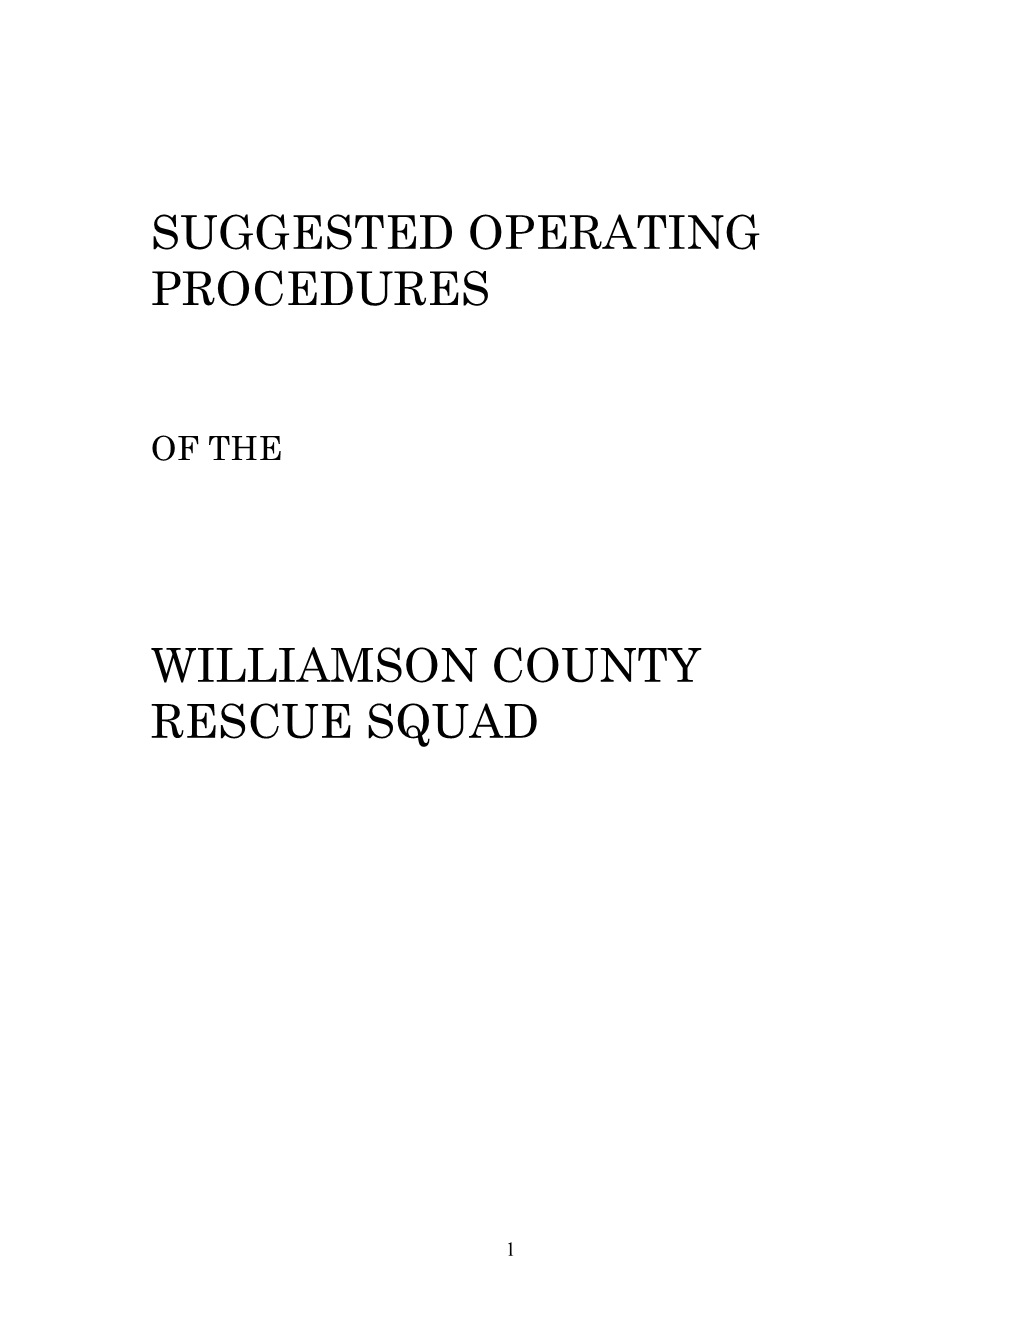 Suggested Operating Procedures Williamson County Rescue Squad.Pdf